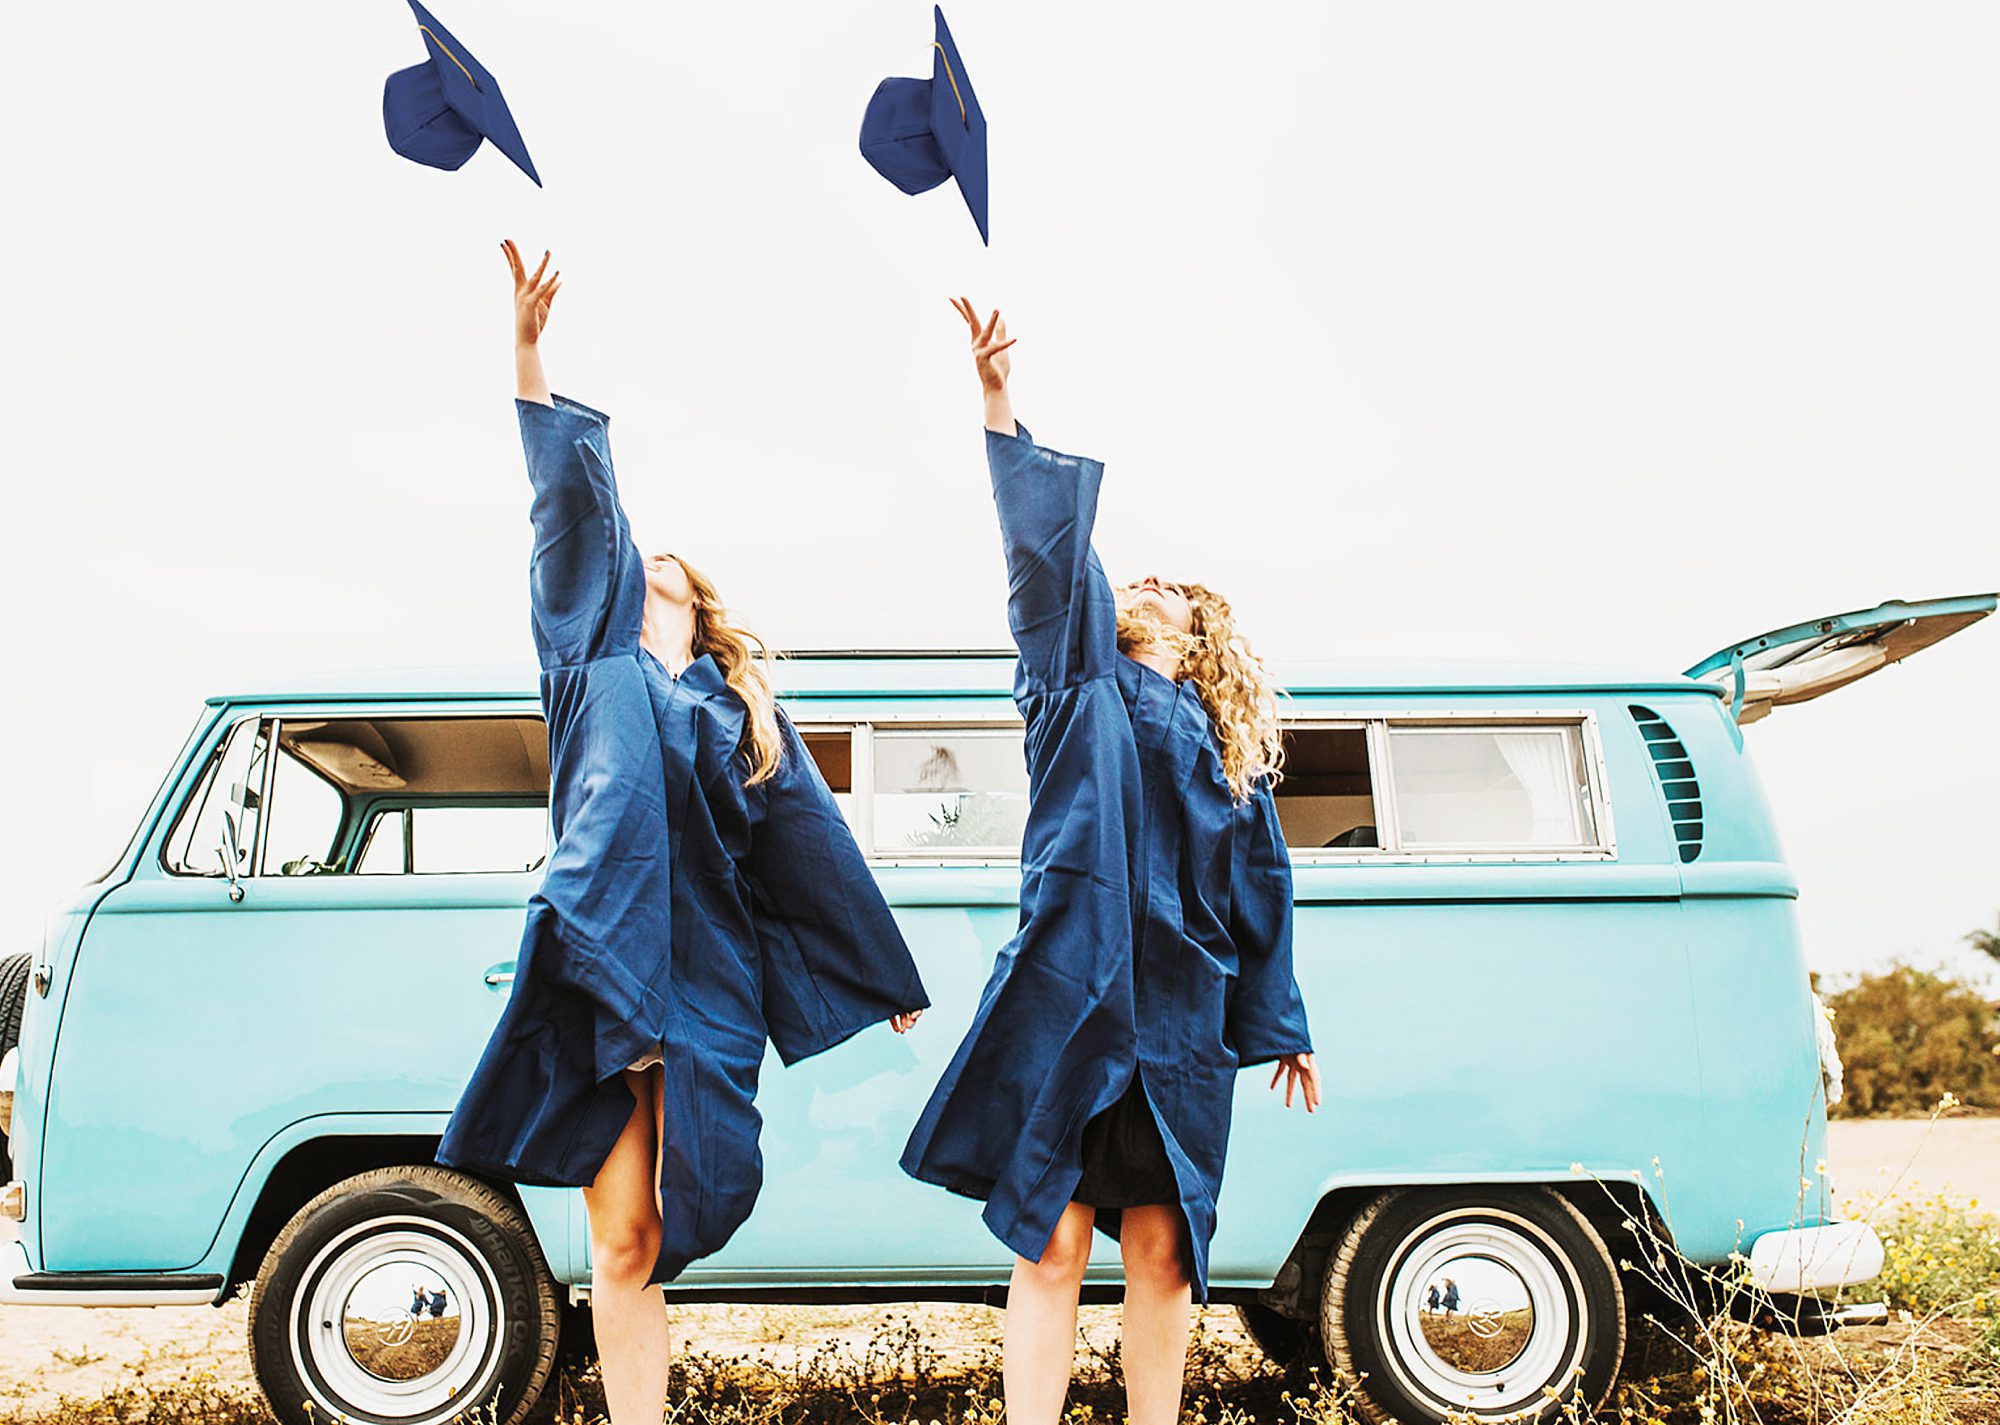 Carlsbad graduation portraits featuring the Funky Bus